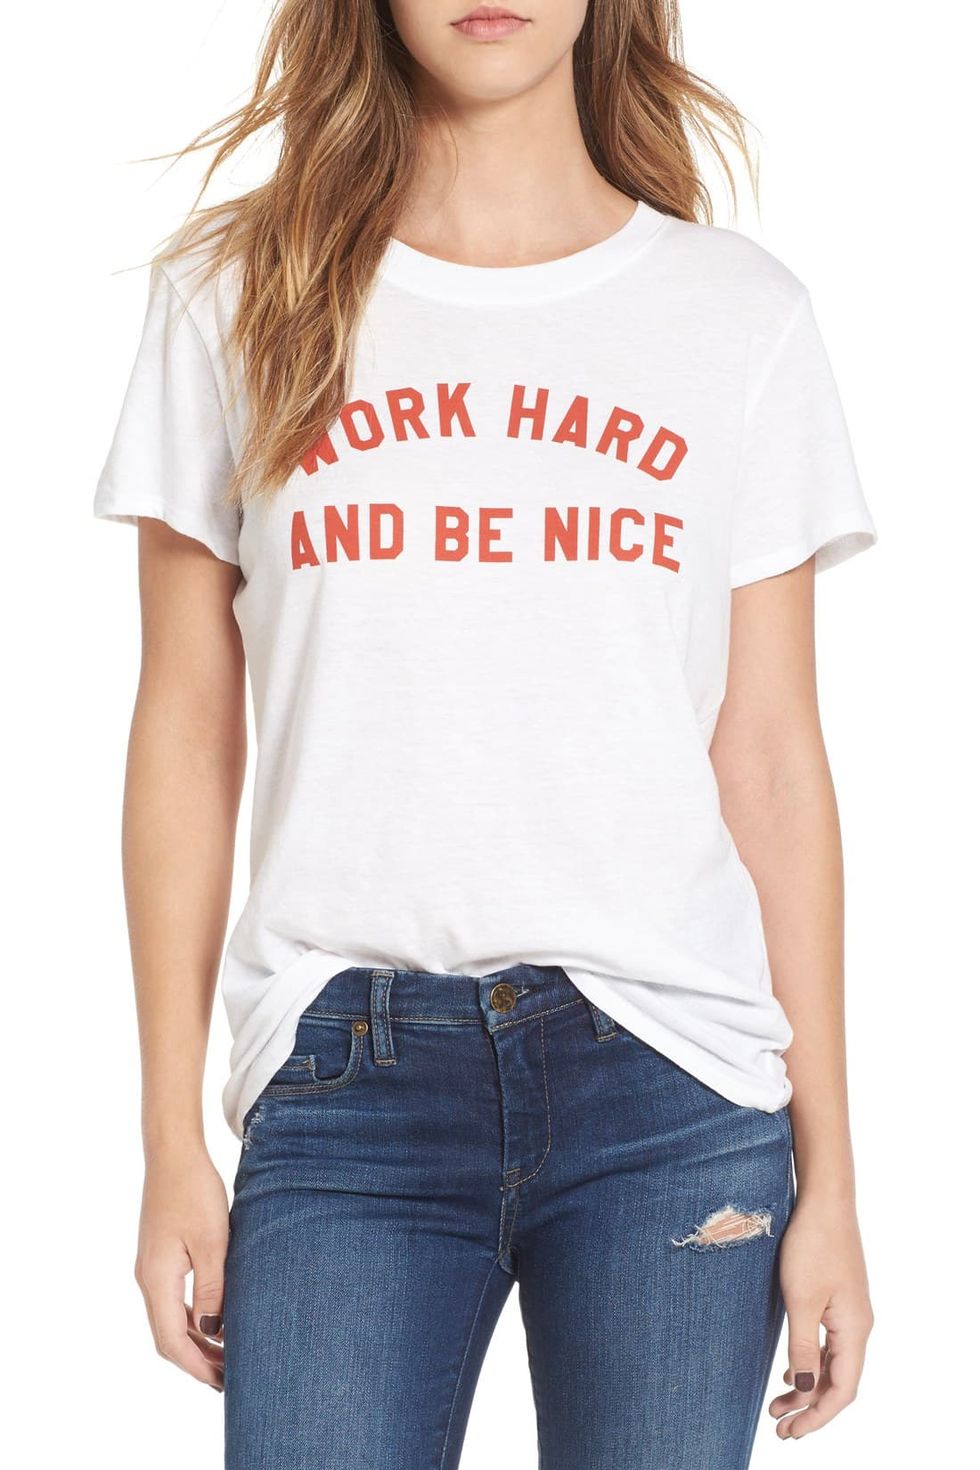 Best white T-shirt women 2022: Gap, H&M, Next, M&S and more